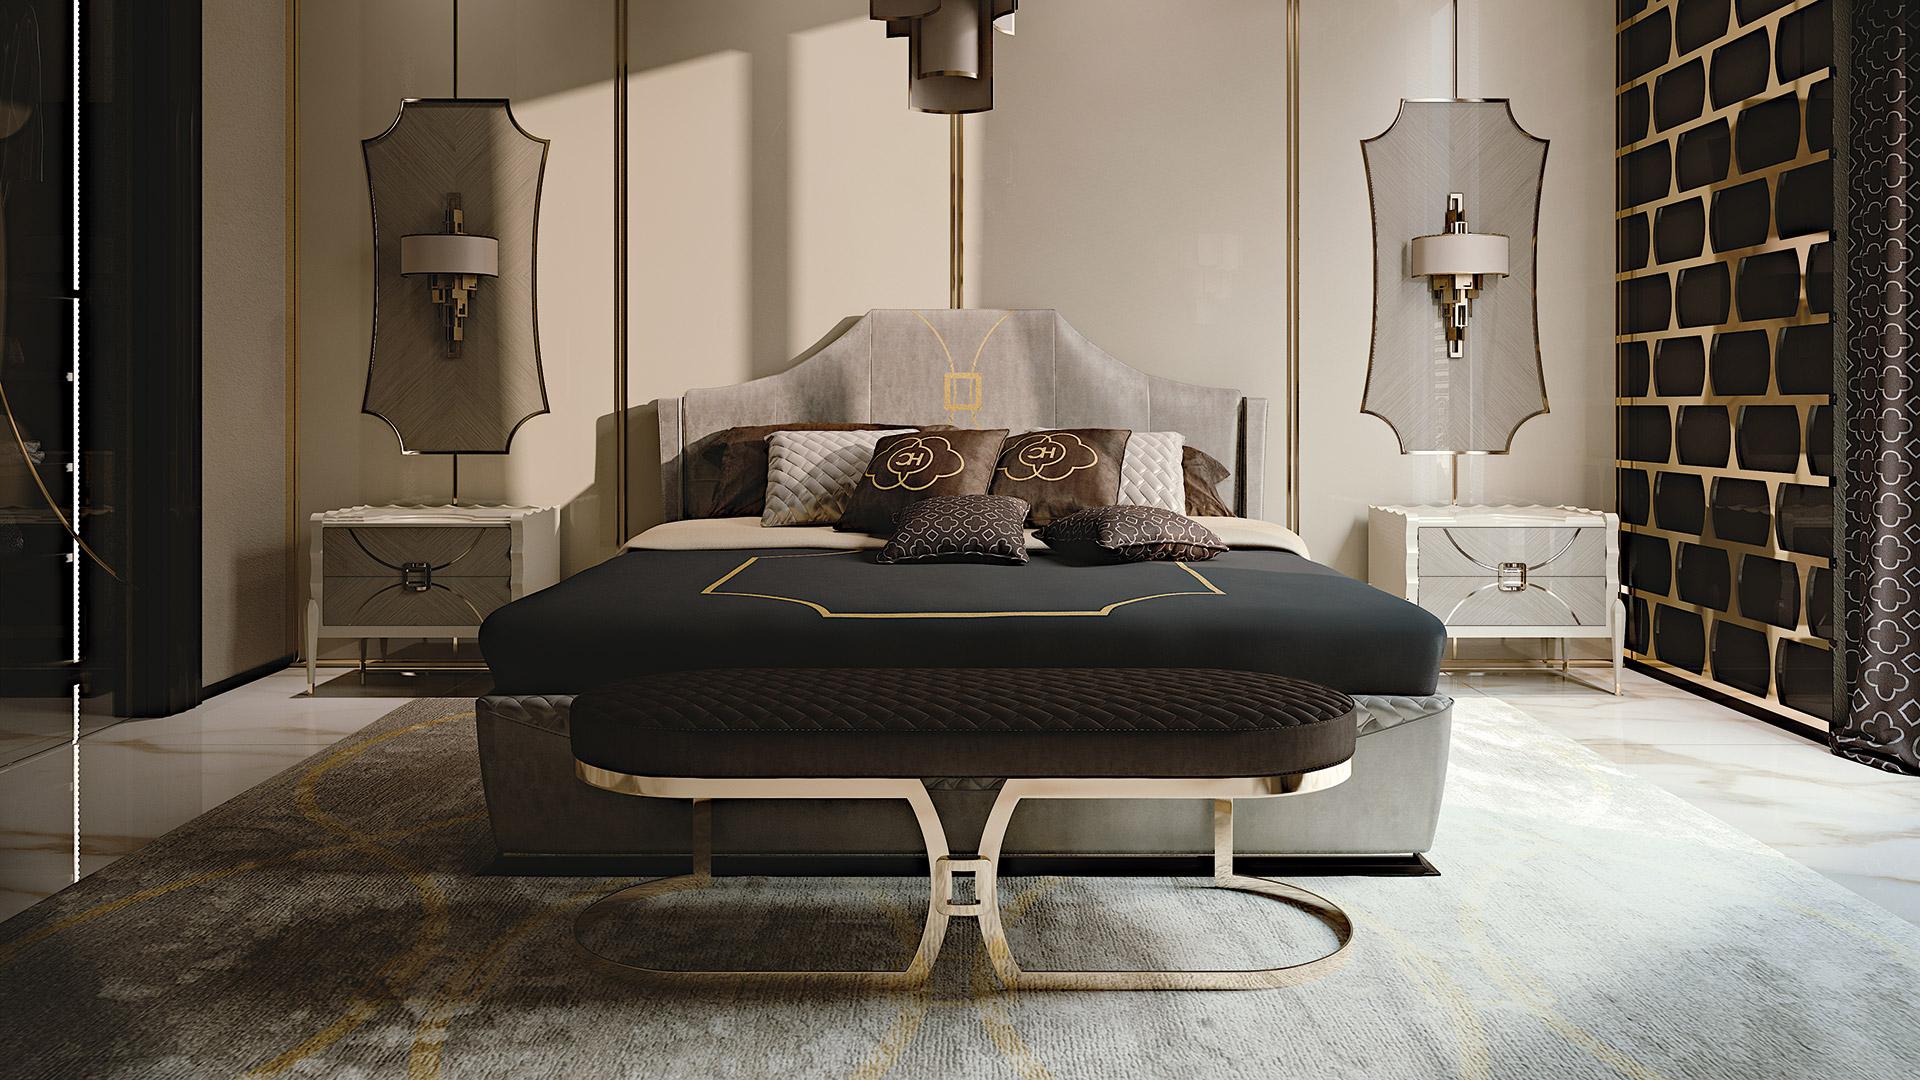 Padded bed. Mattress measures 180 x 200cm. Characterized by beautiful upholstered headboard with two arches and a square embroidered to create the typical decor of GLAMOUR Collection.
The sommier is upholstered with a wooden golden finished base